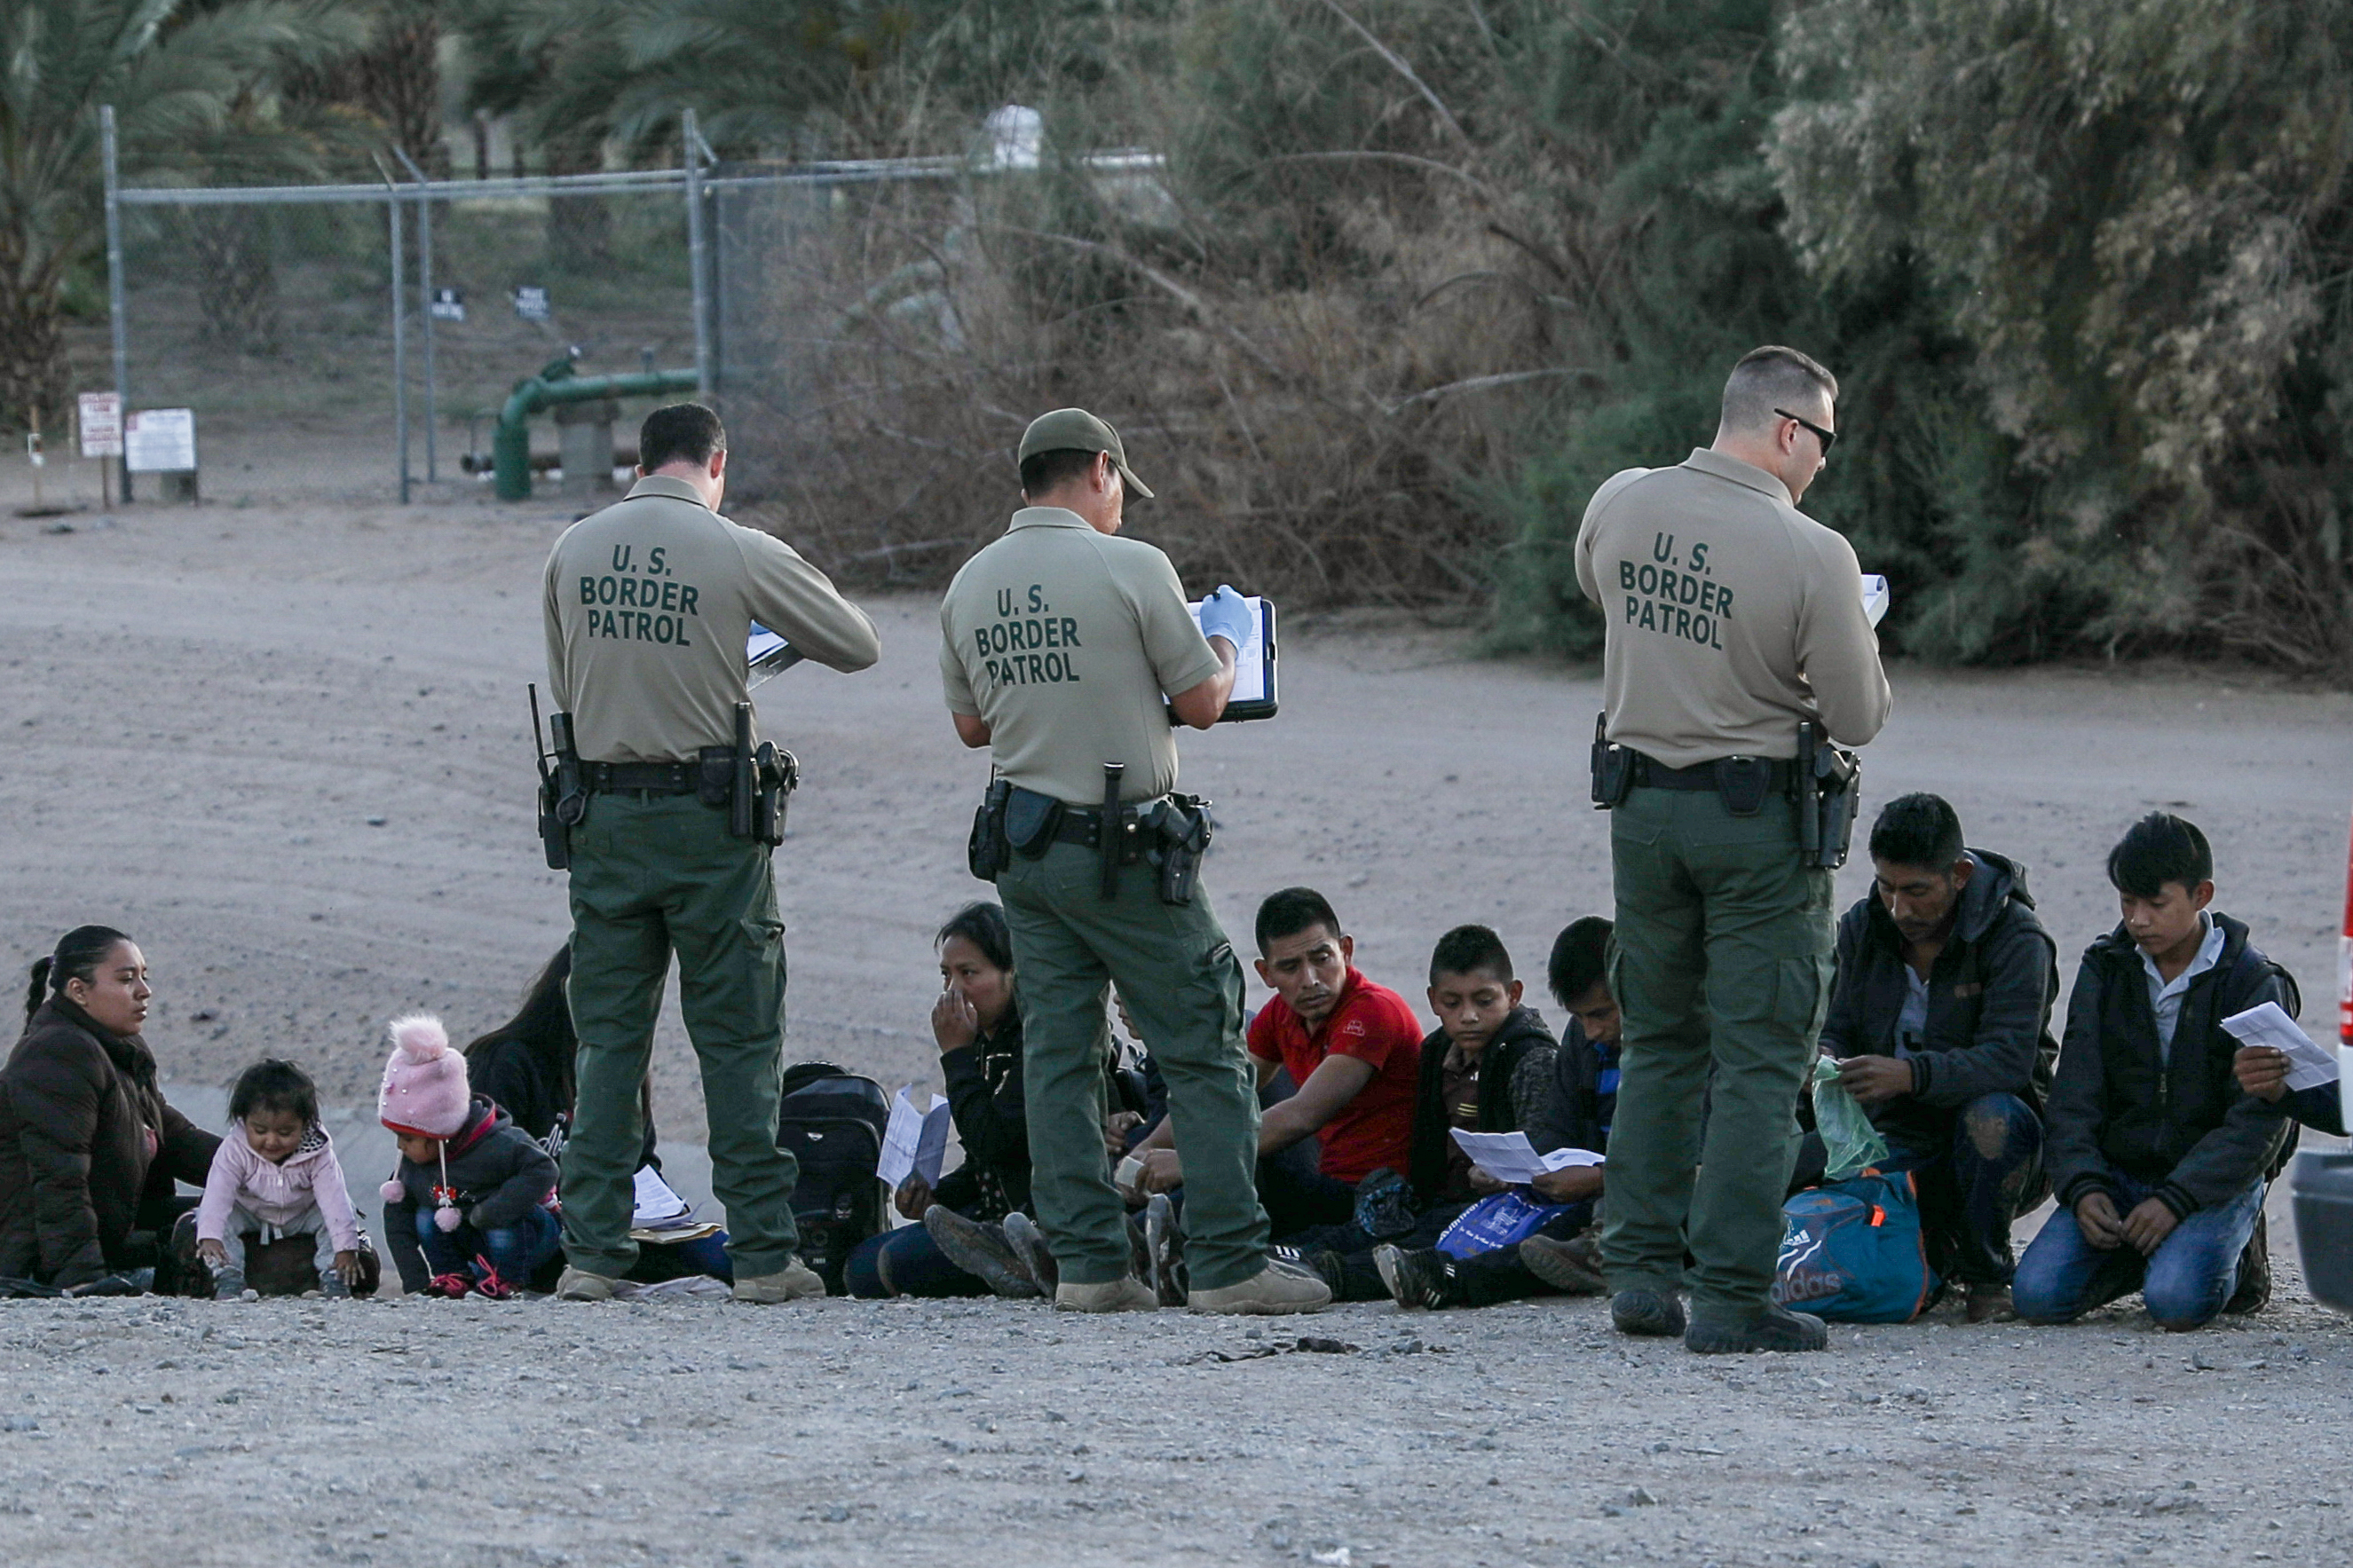 Deep Dive (Nov. 5): ‘An Absolute Catastrophe’: John Fonte on the Immigration Crisis